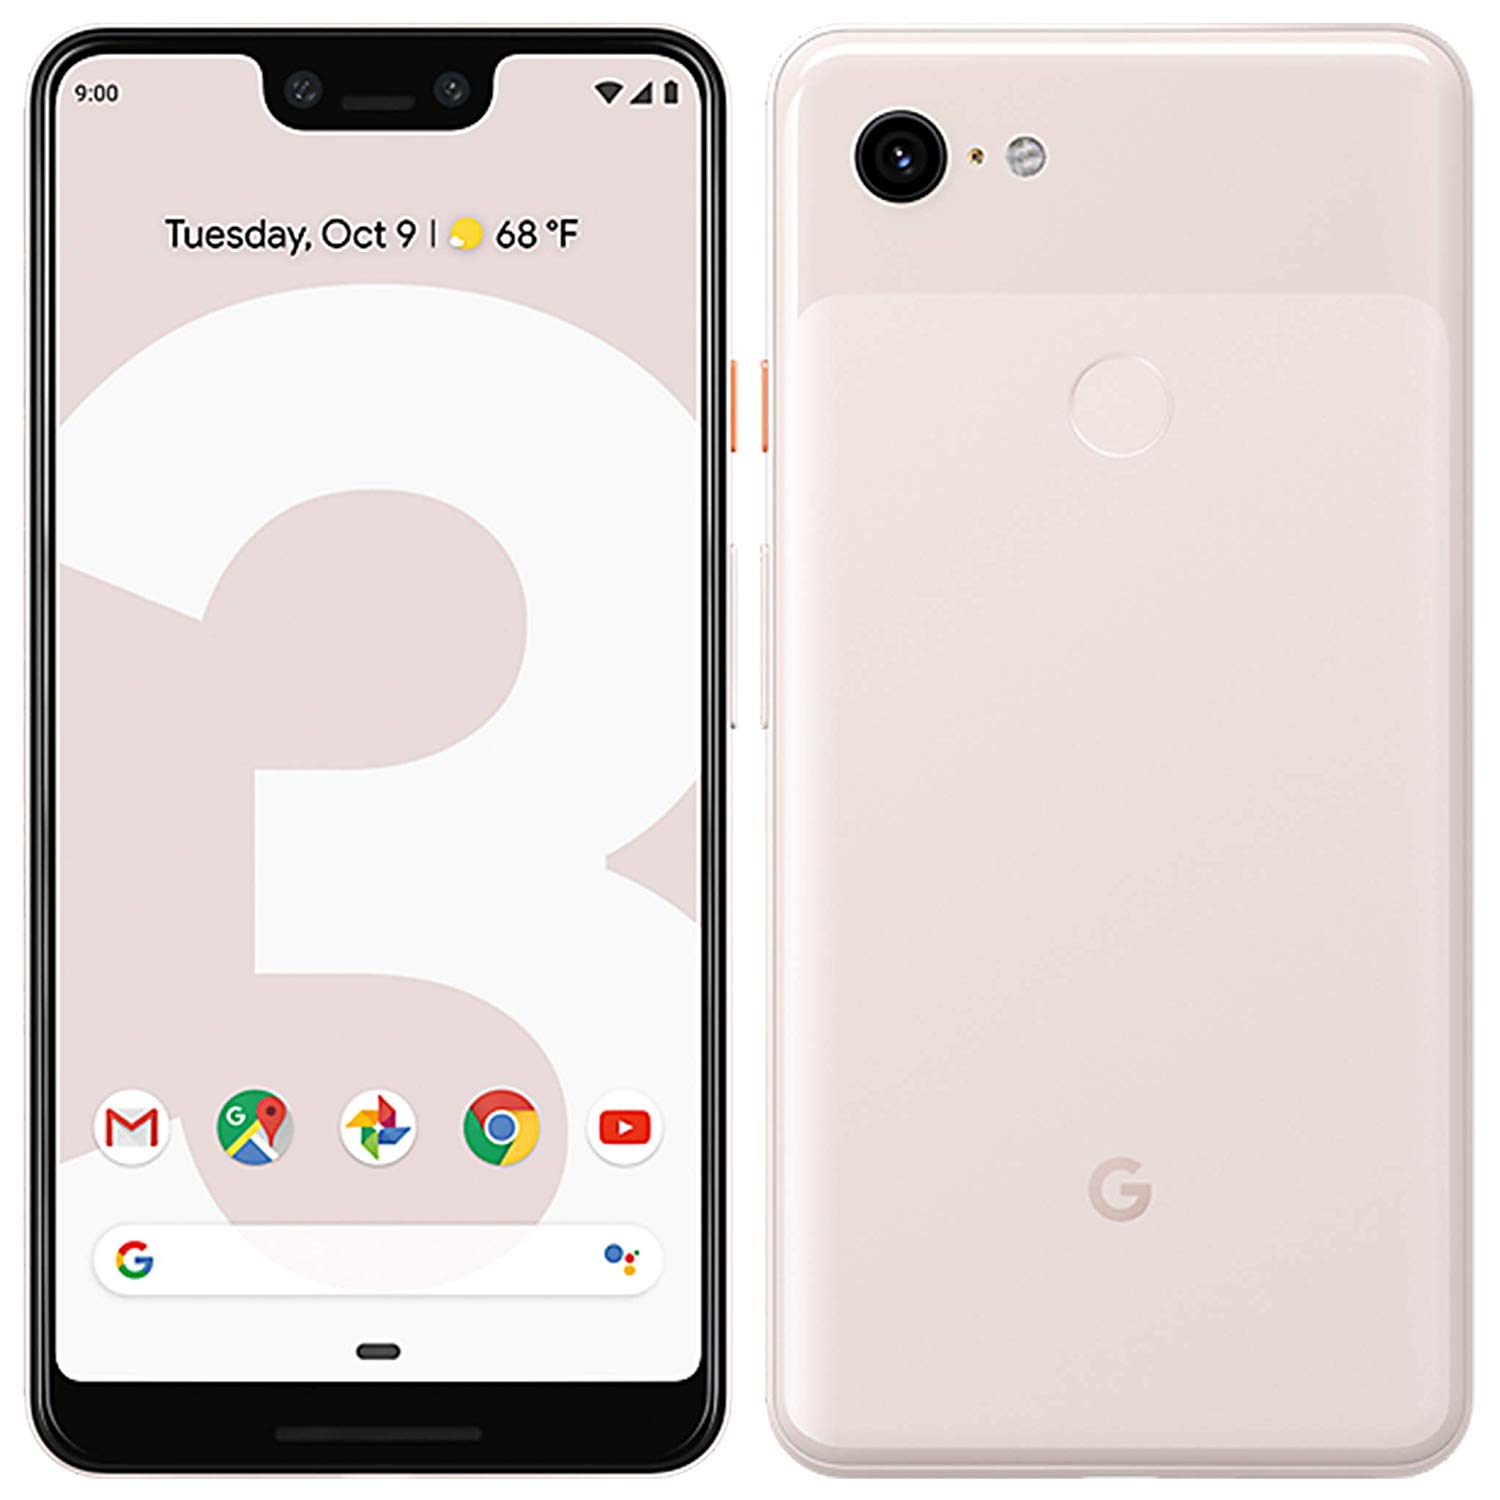 Google Pixel 3XL 64GB Pink (Unlocked) Great Condition - image 1 of 3